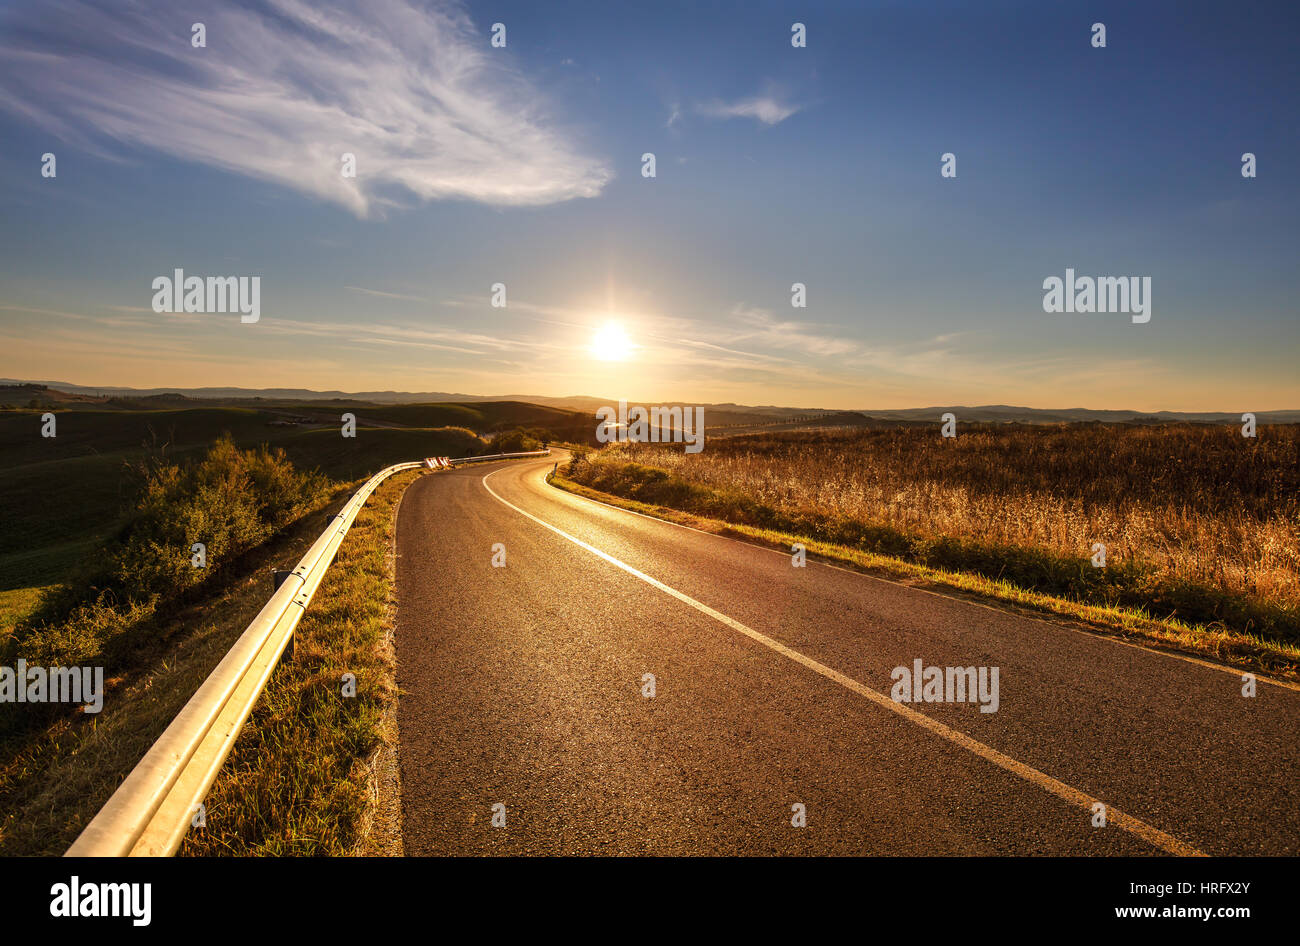 Tuscany, straight road rural landscape of Tuscany with yellow and green field. Italy. Europe. Stock Photo